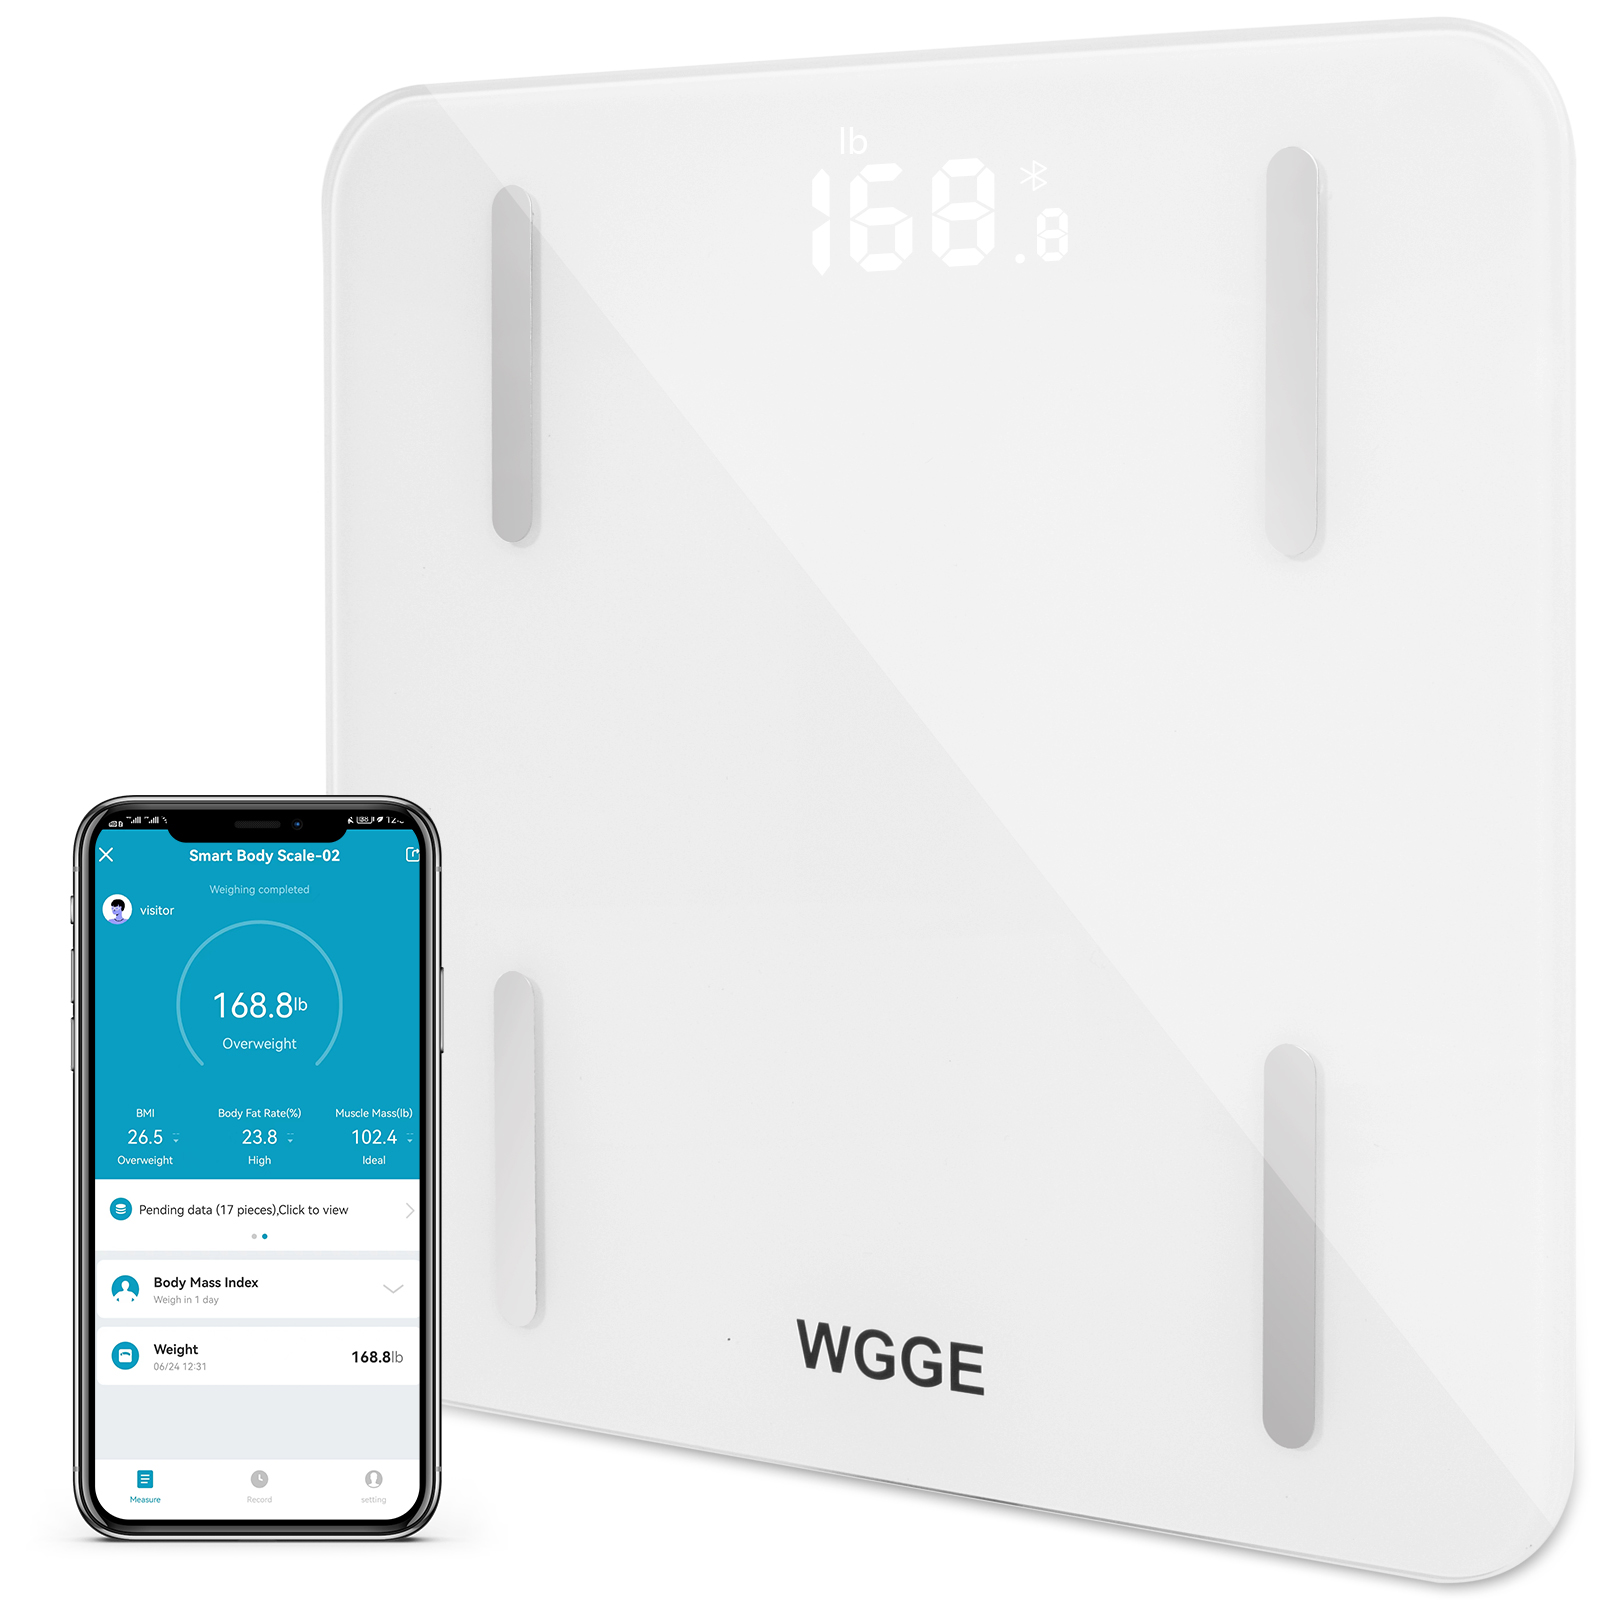 Bluetooth Smart Body Fat Scale with iOS and Android App, Including Weight,  BMI, Body Fat, Muscle Mass, Water Weight, and Bone Mass, etc.